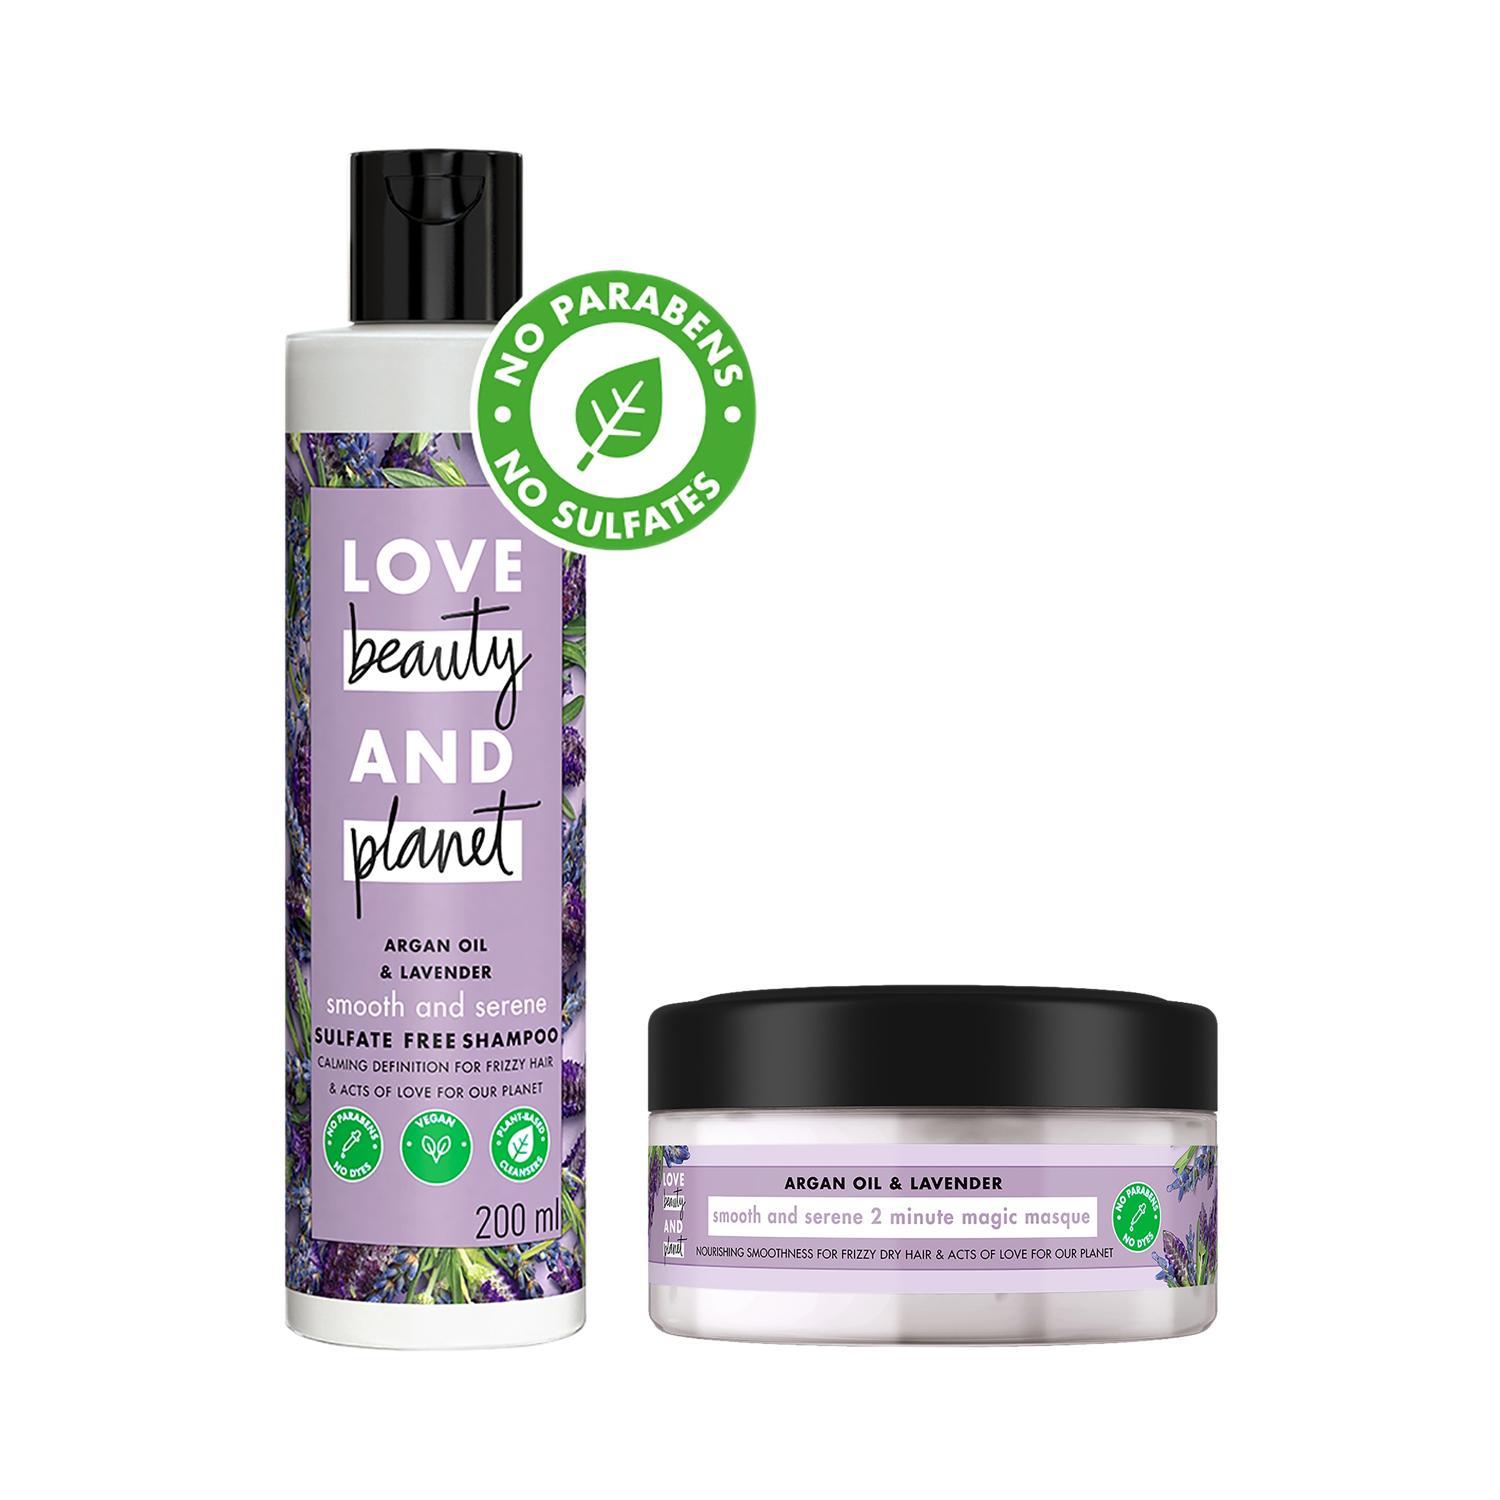 love beauty & planet argan oil and lavender sulfate free smooth and serene shampoo & hair mask combo